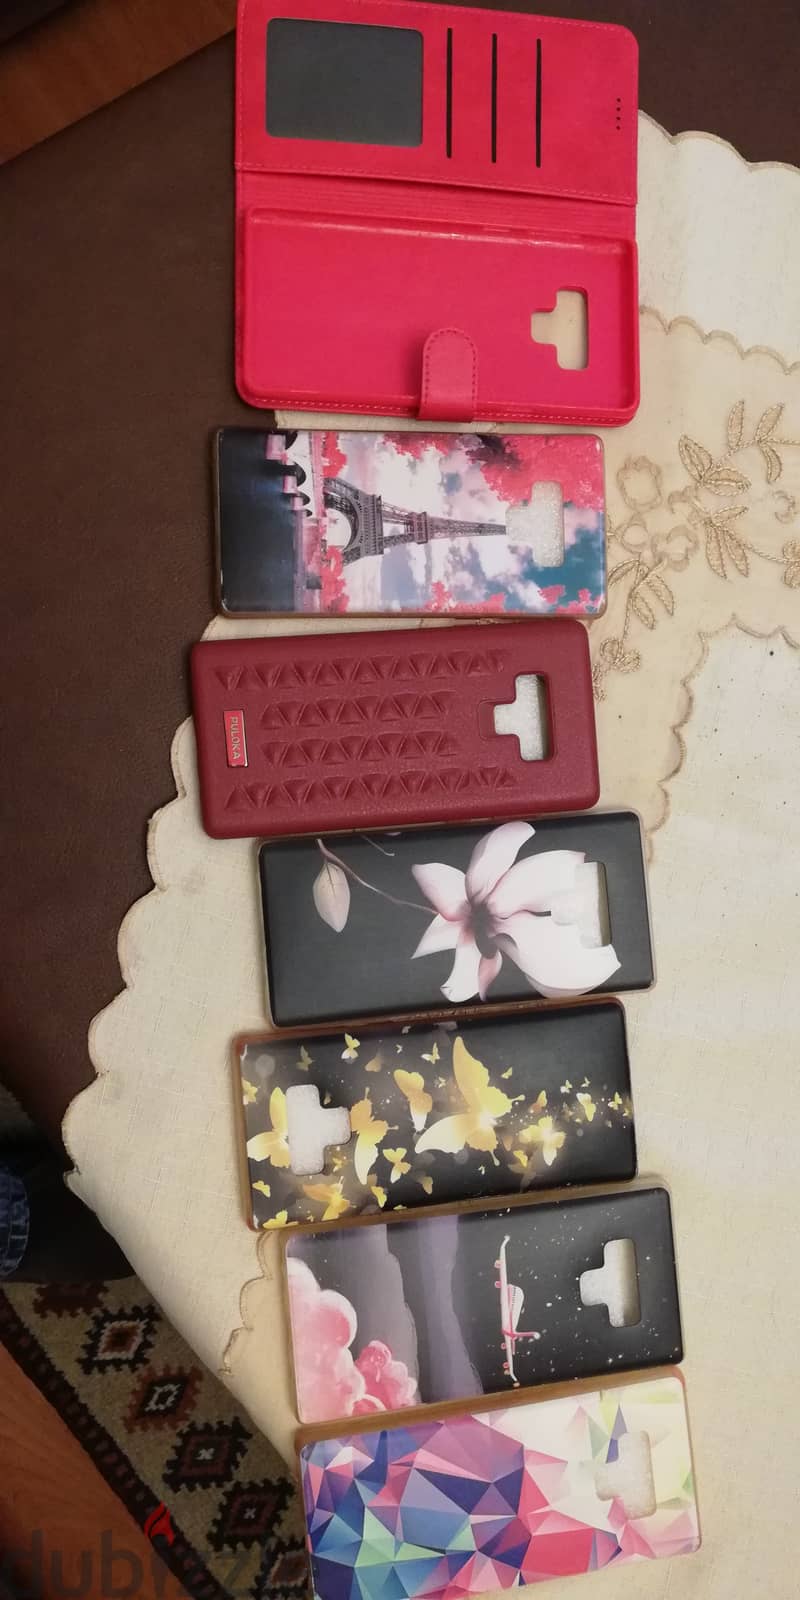 original phone covers note 9 price reduced 11